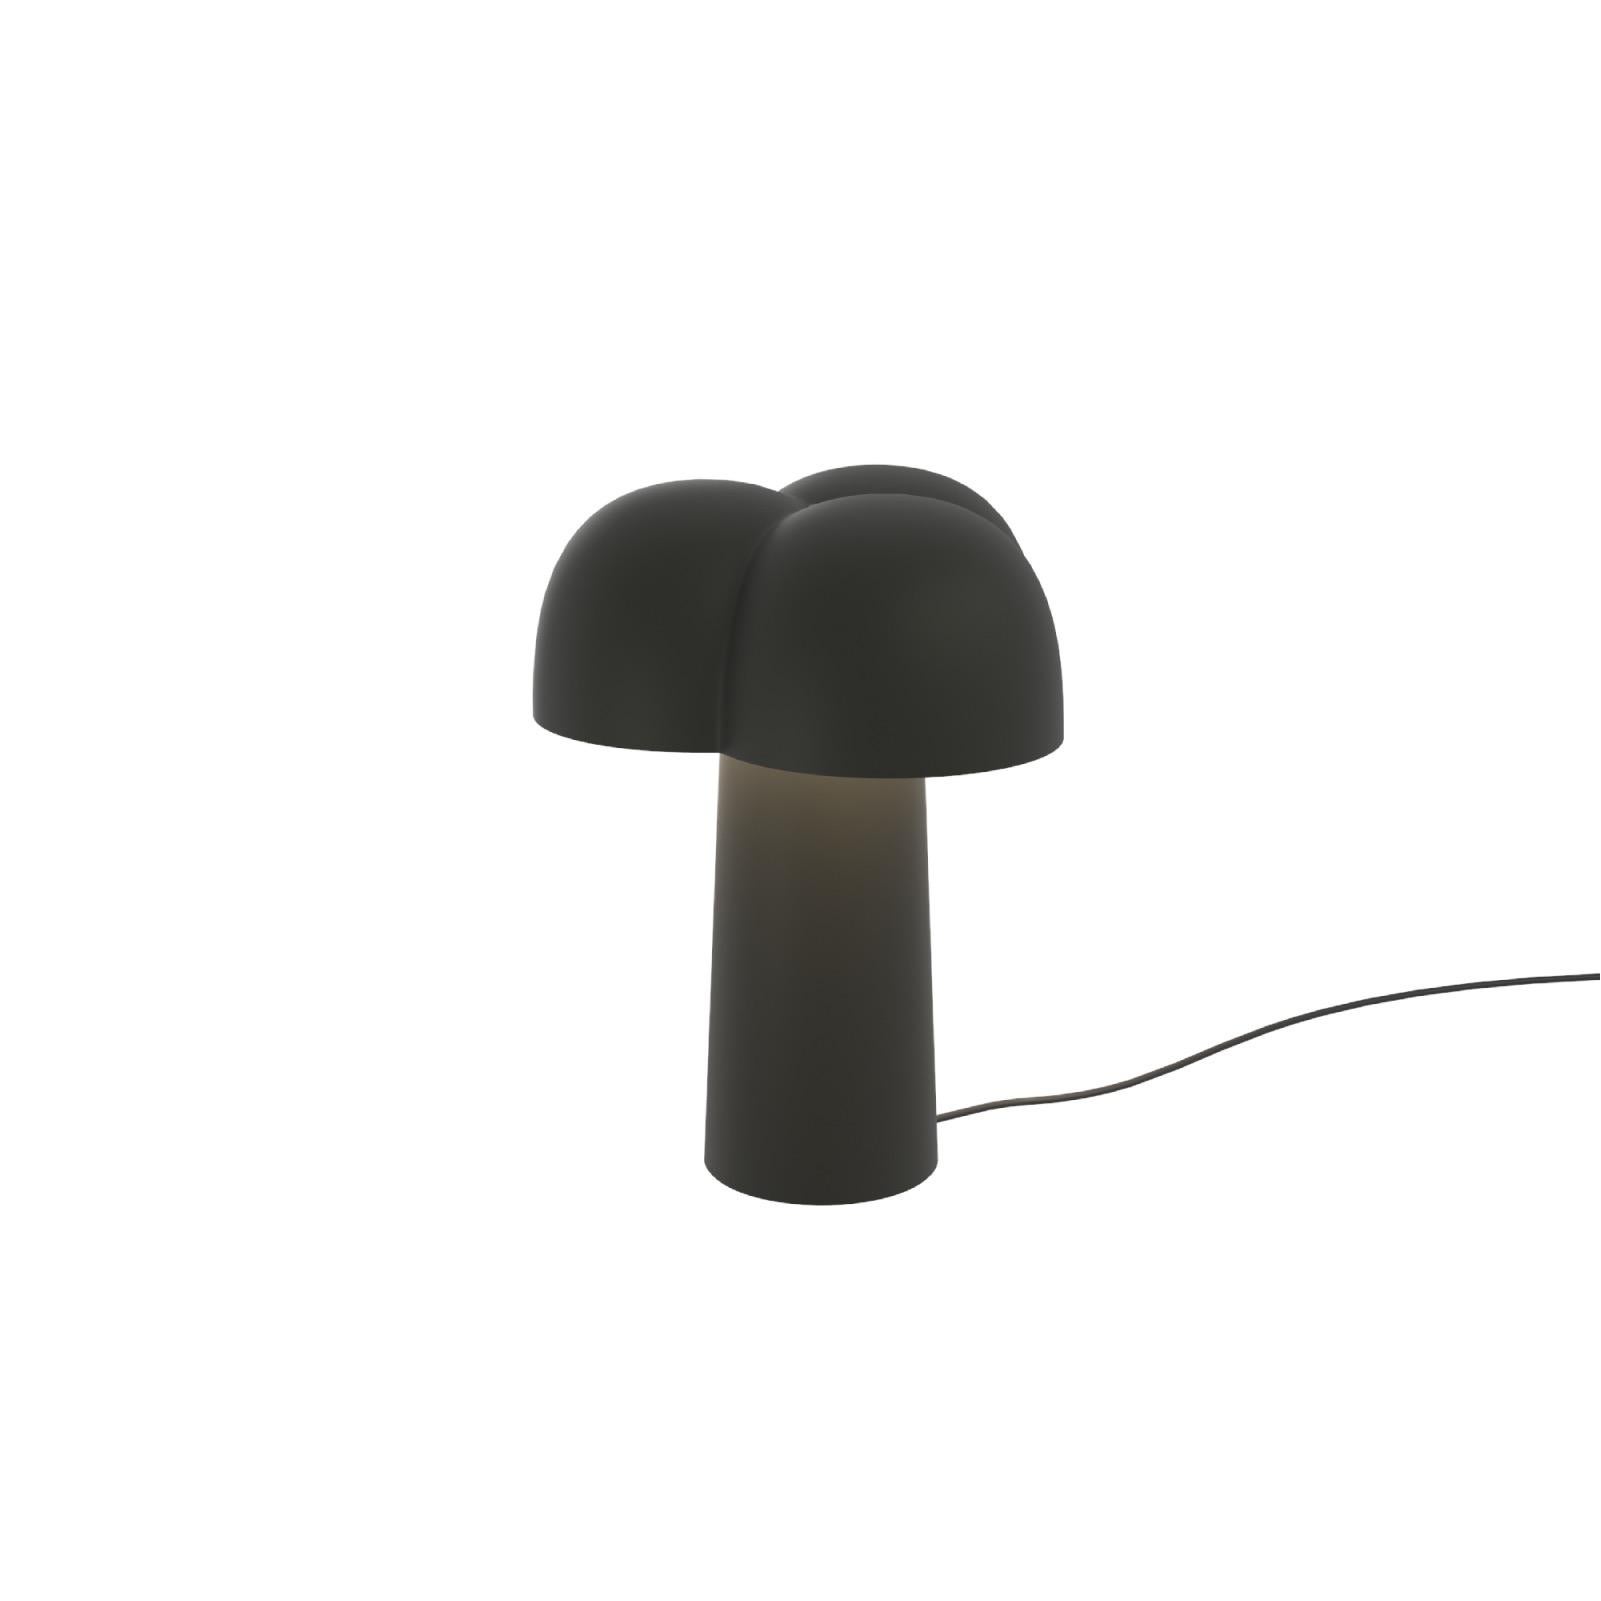 Cotton Table lamp by Sebastian Herkner x AGO Lighting
Charcoal

Materials: Aluminum, Stainless 
Light Source: Integrated LED (SMD), DC
Watt. 3W
Wire length: 1.8 m
Power: 5 V / 3 A DC Adapter(*incl.)

Available colors:
Charcoal, chocolate,